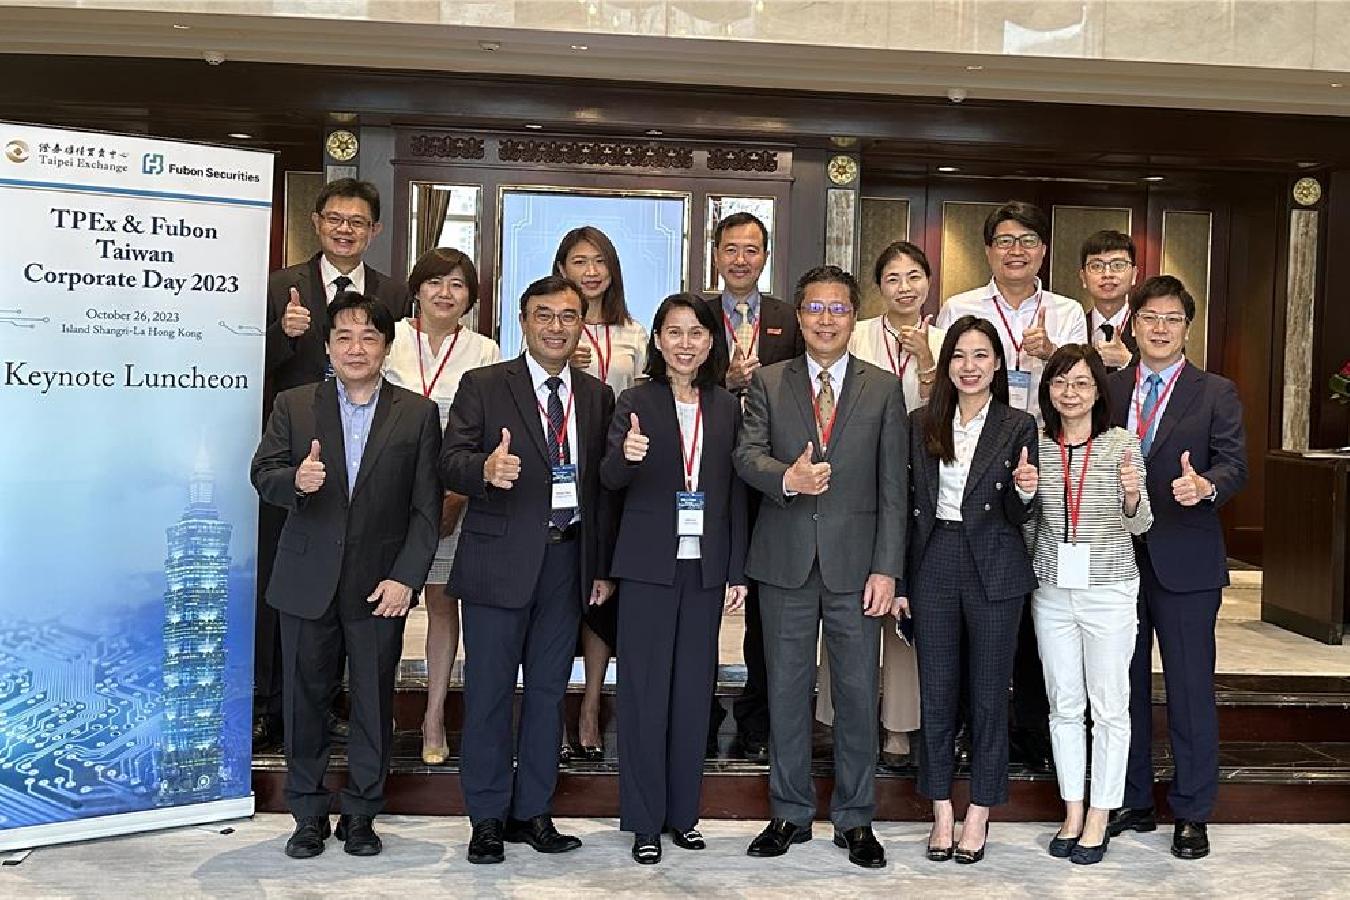 TPEx has organized jointly with Fubon Securities to hold the“2023 Taiwan Corporate Day”event in Hong Kong on October 26th, 2023 and successfully received the positive feedback from global institutional investors.